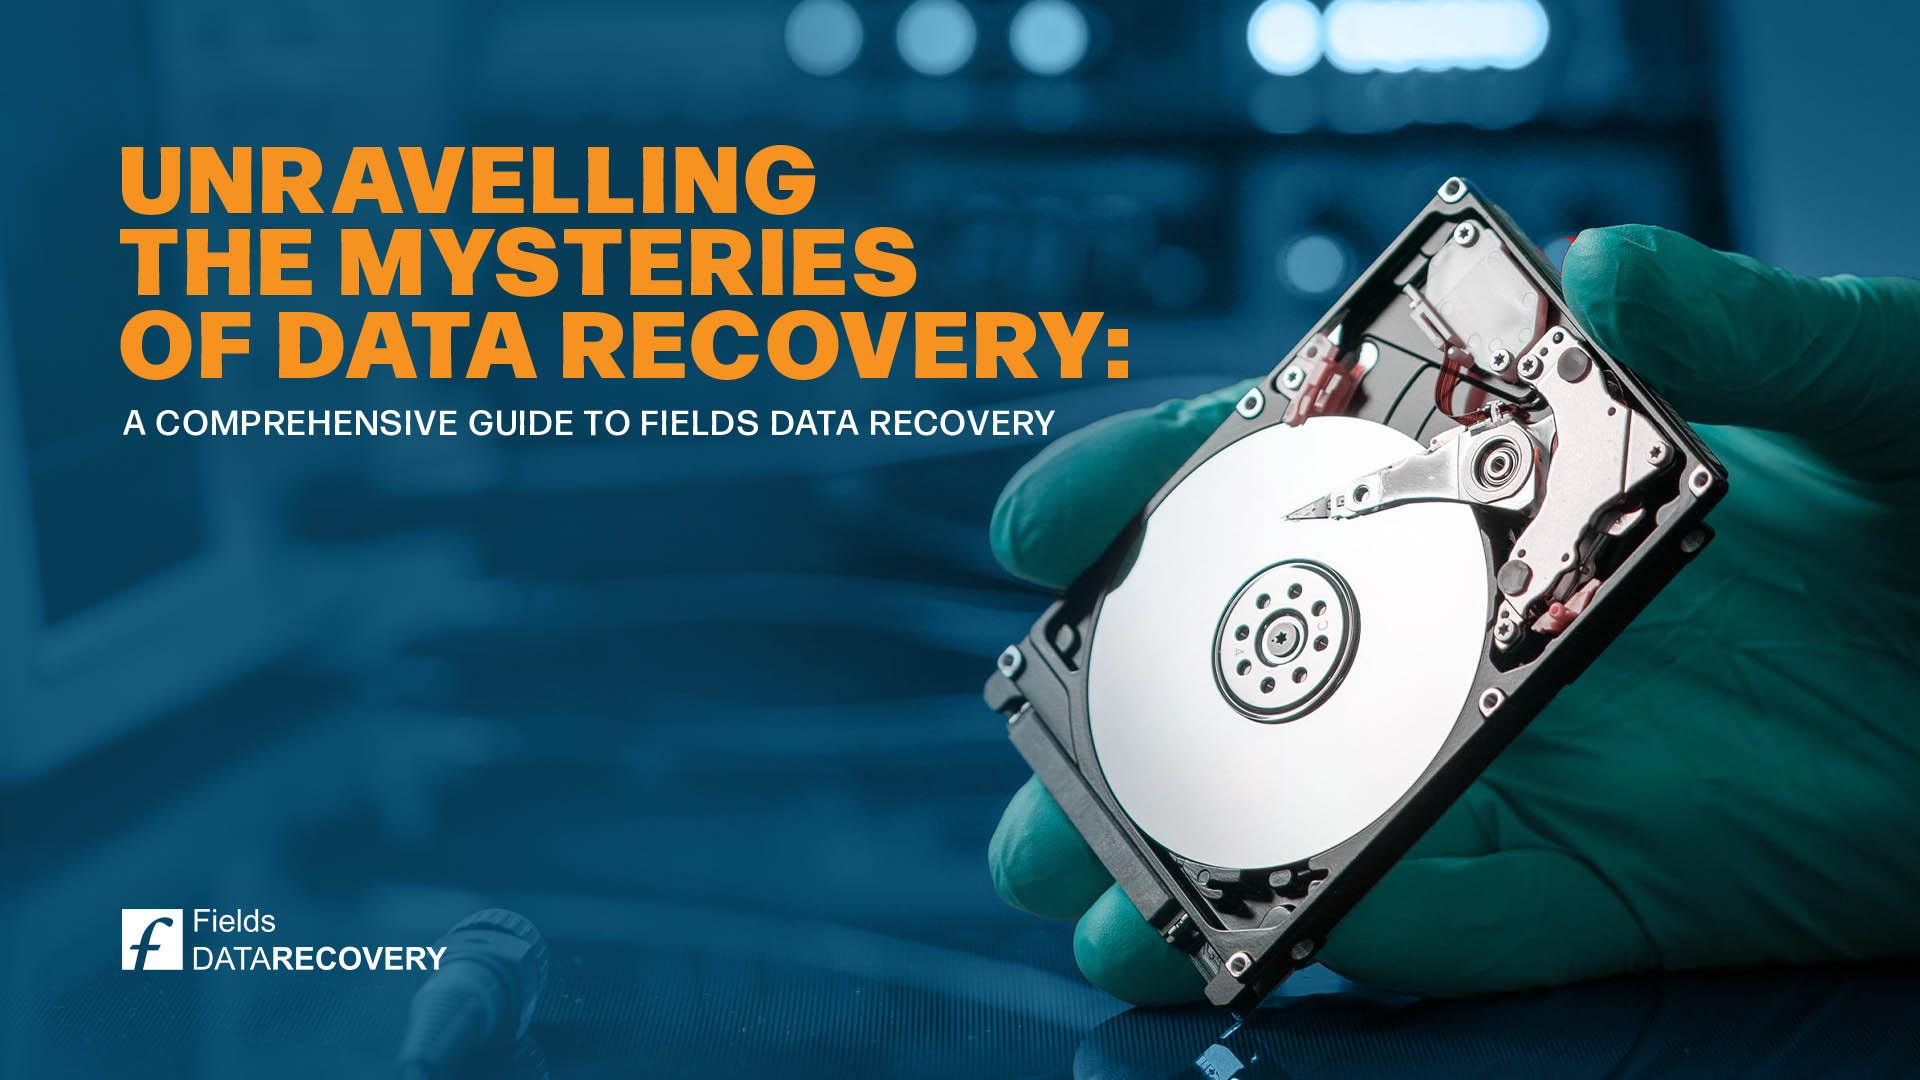 Unravelling the Mysteries of Data Corruption Recovery: A Comprehensive Guide to Fields Data Recovery